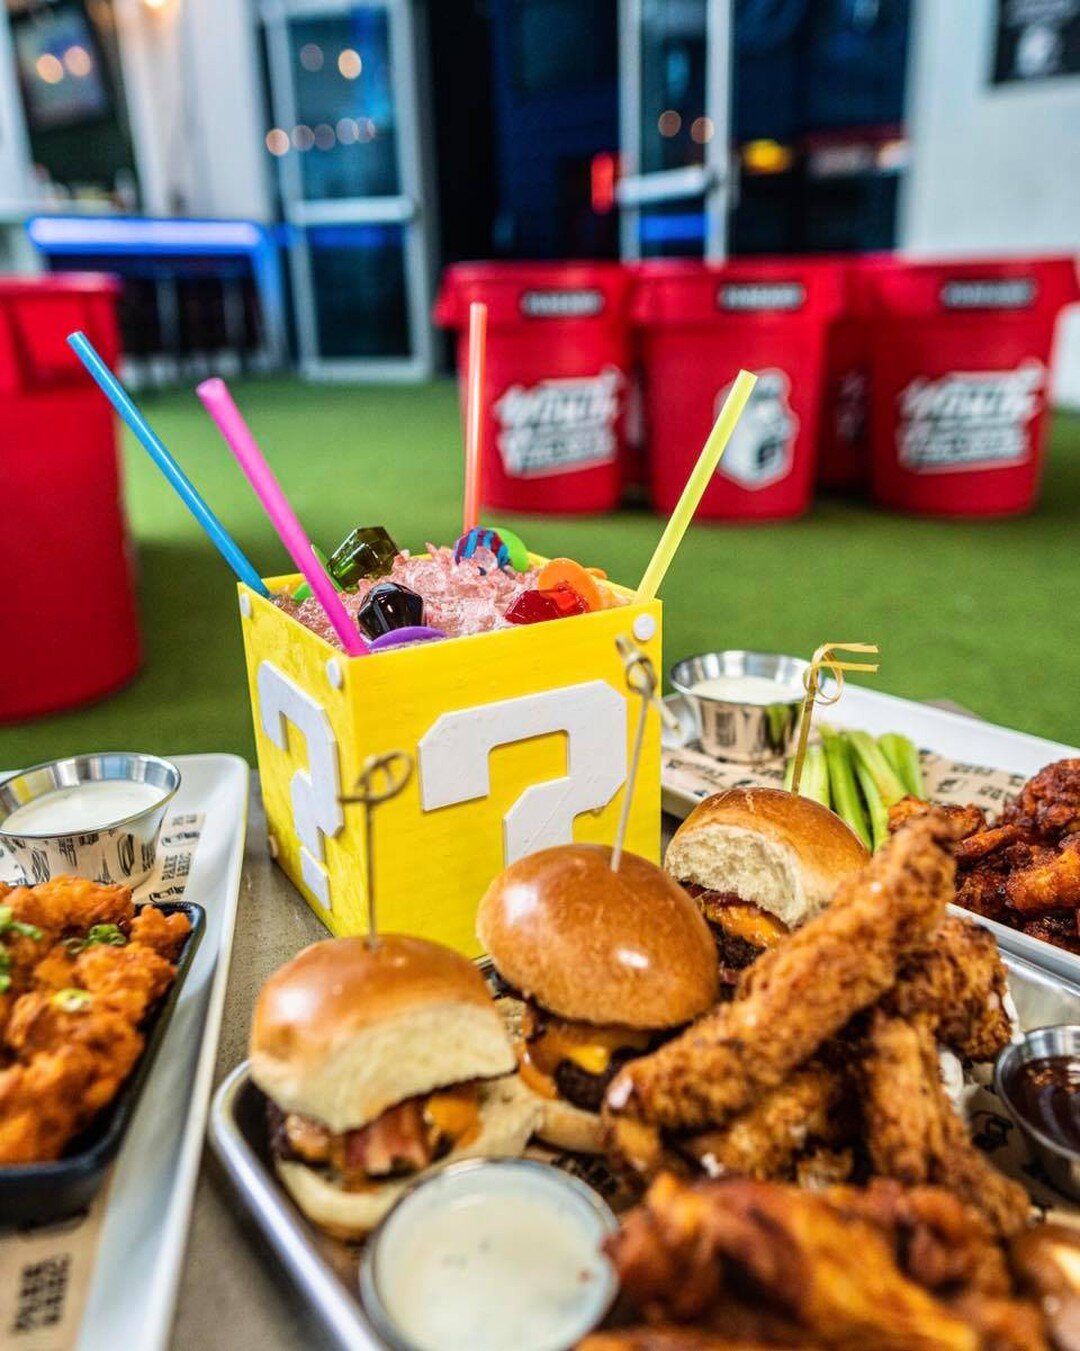 Bites first, then we ball! 🍔🍗🛢🏐🎉
1/2 off Bites, giant bucket beer pong tournament, drink specials, and throwback tunes by @djd2_tampa&mdash;Don&rsquo;t miss #RewindWednesday at #ParkRecTPA!